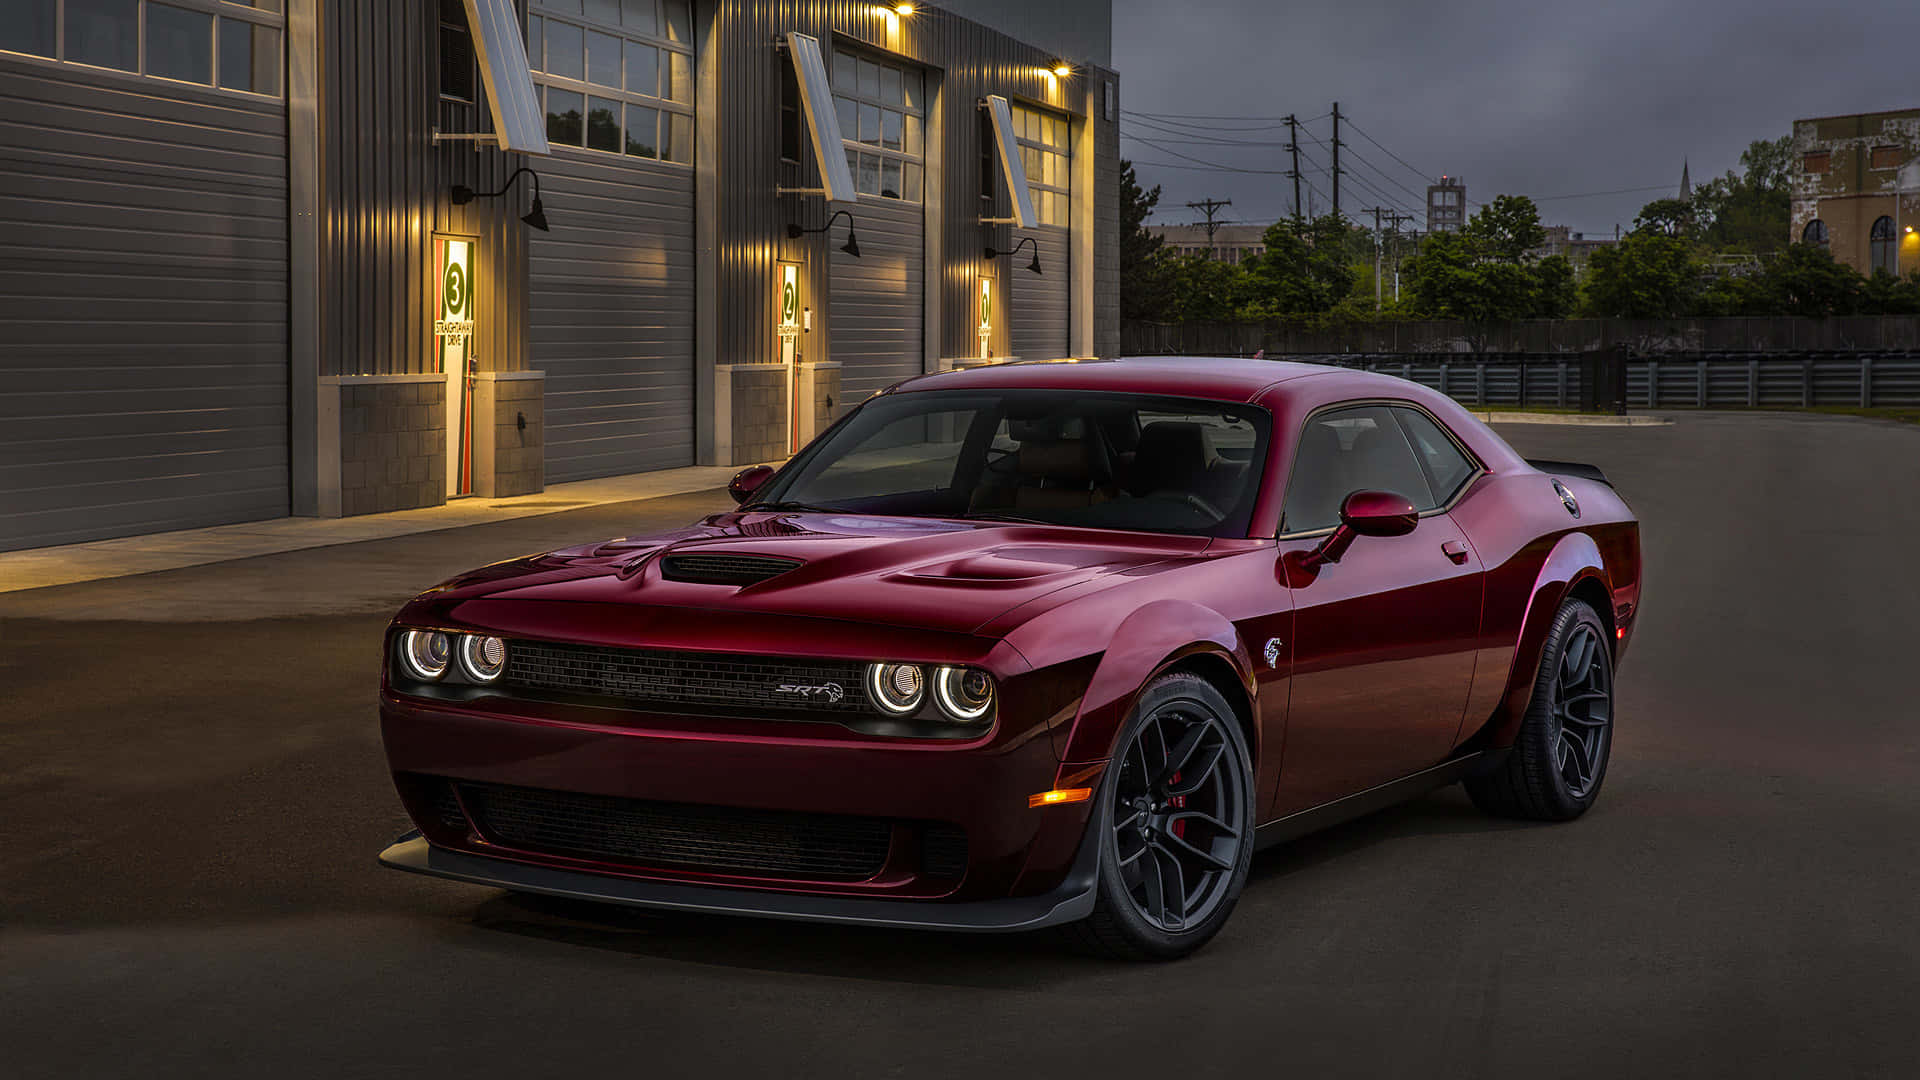 The Red 2019 Dodge Challenger Srt Is Parked In Front Of A Garage